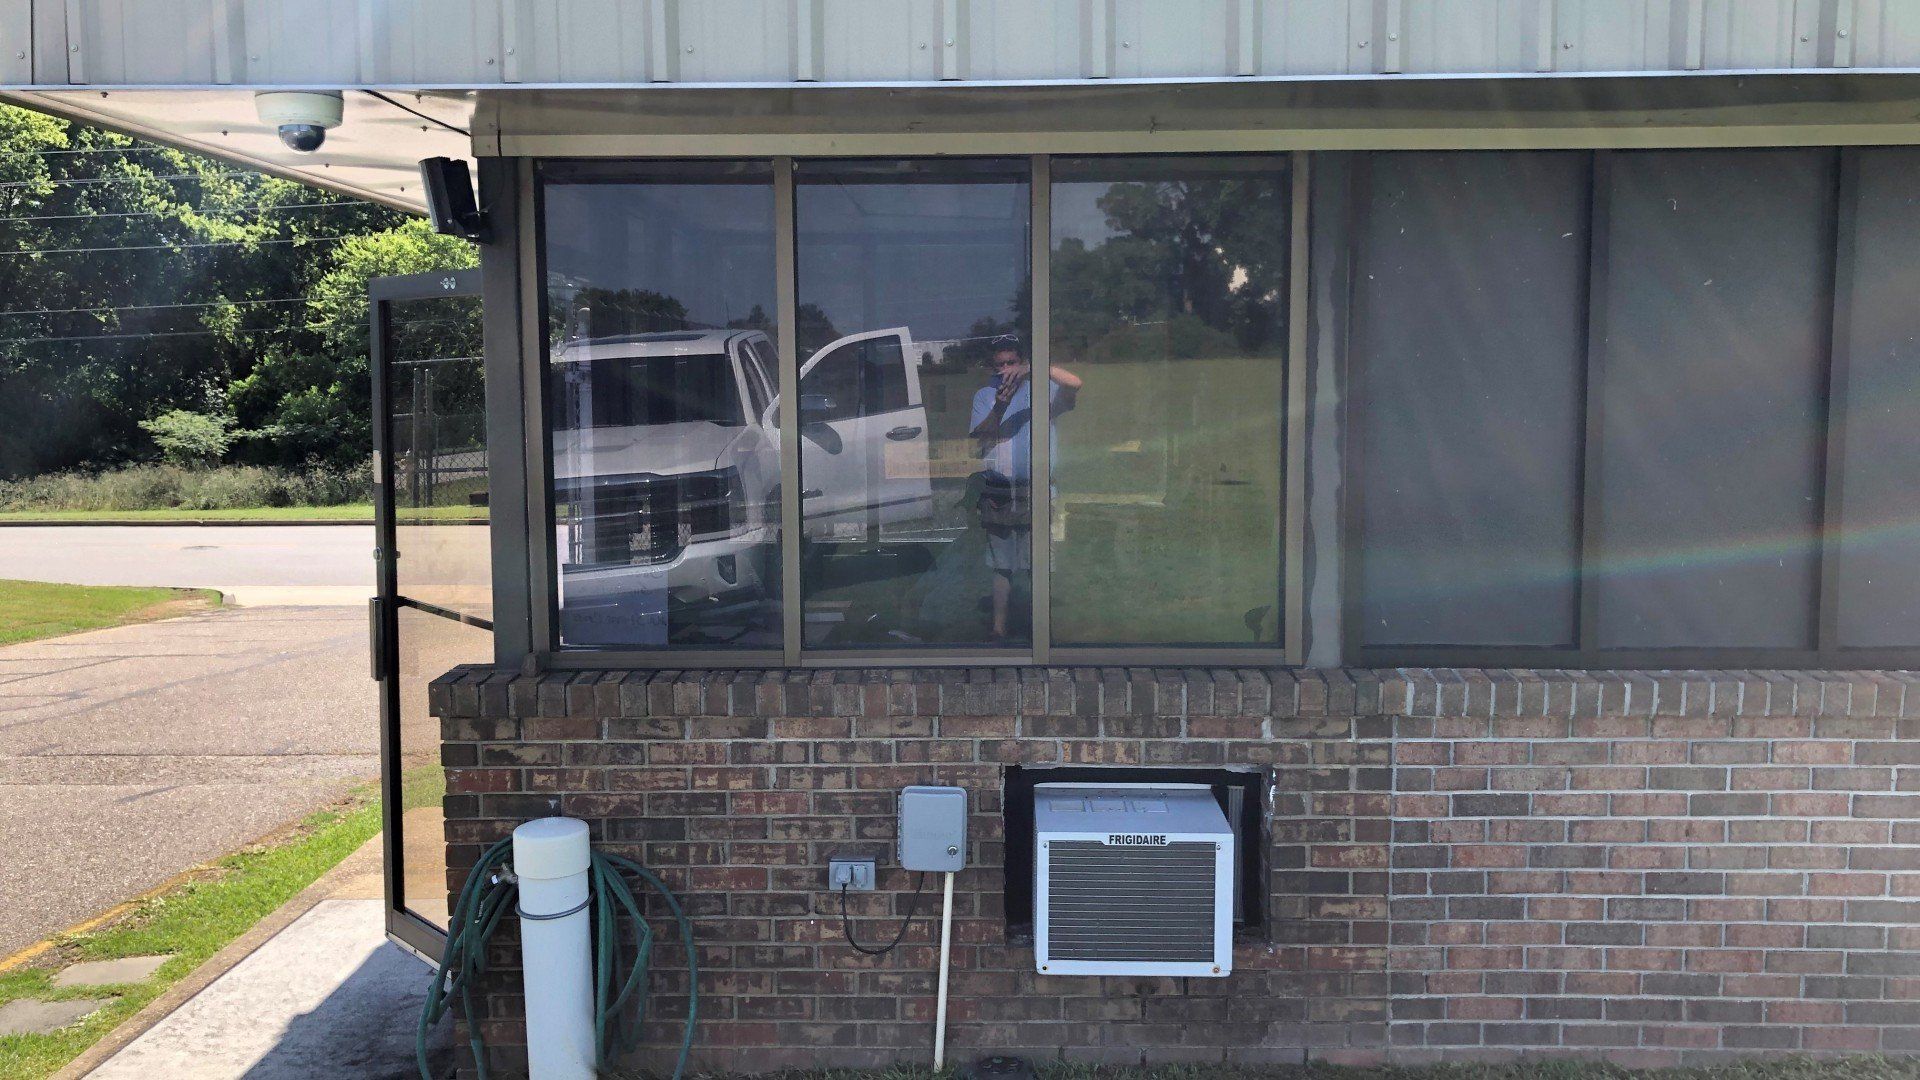 Professional business tinting service - The heat and glare was unbearable in the Guard Shack at Steris in Montgomery.